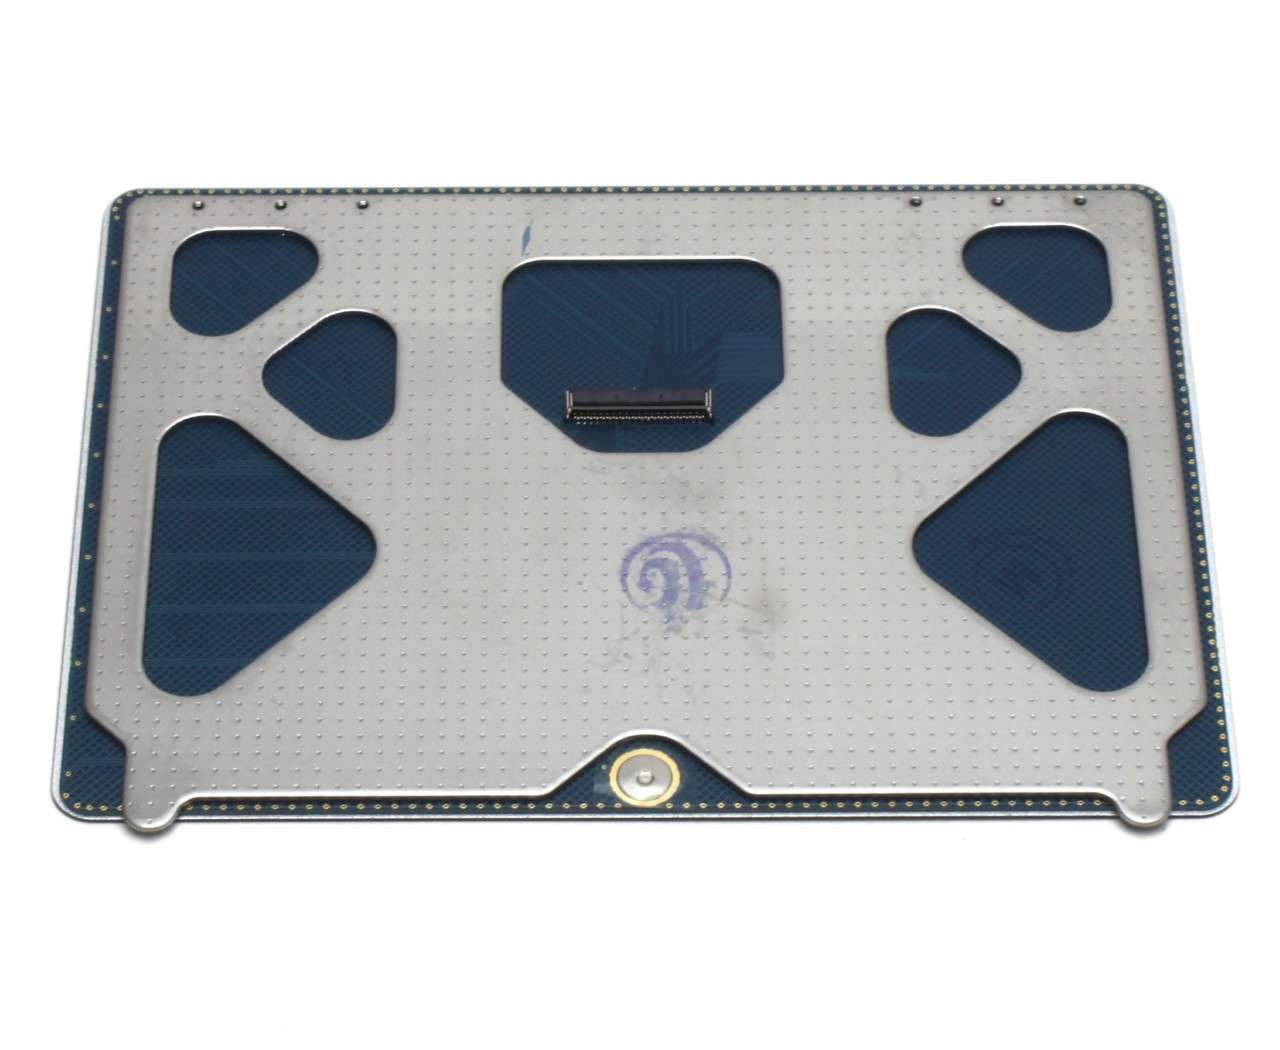 Touchpad Apple Macbook Pro Unibody 13 A1278 Mid 2012 Trackpad image